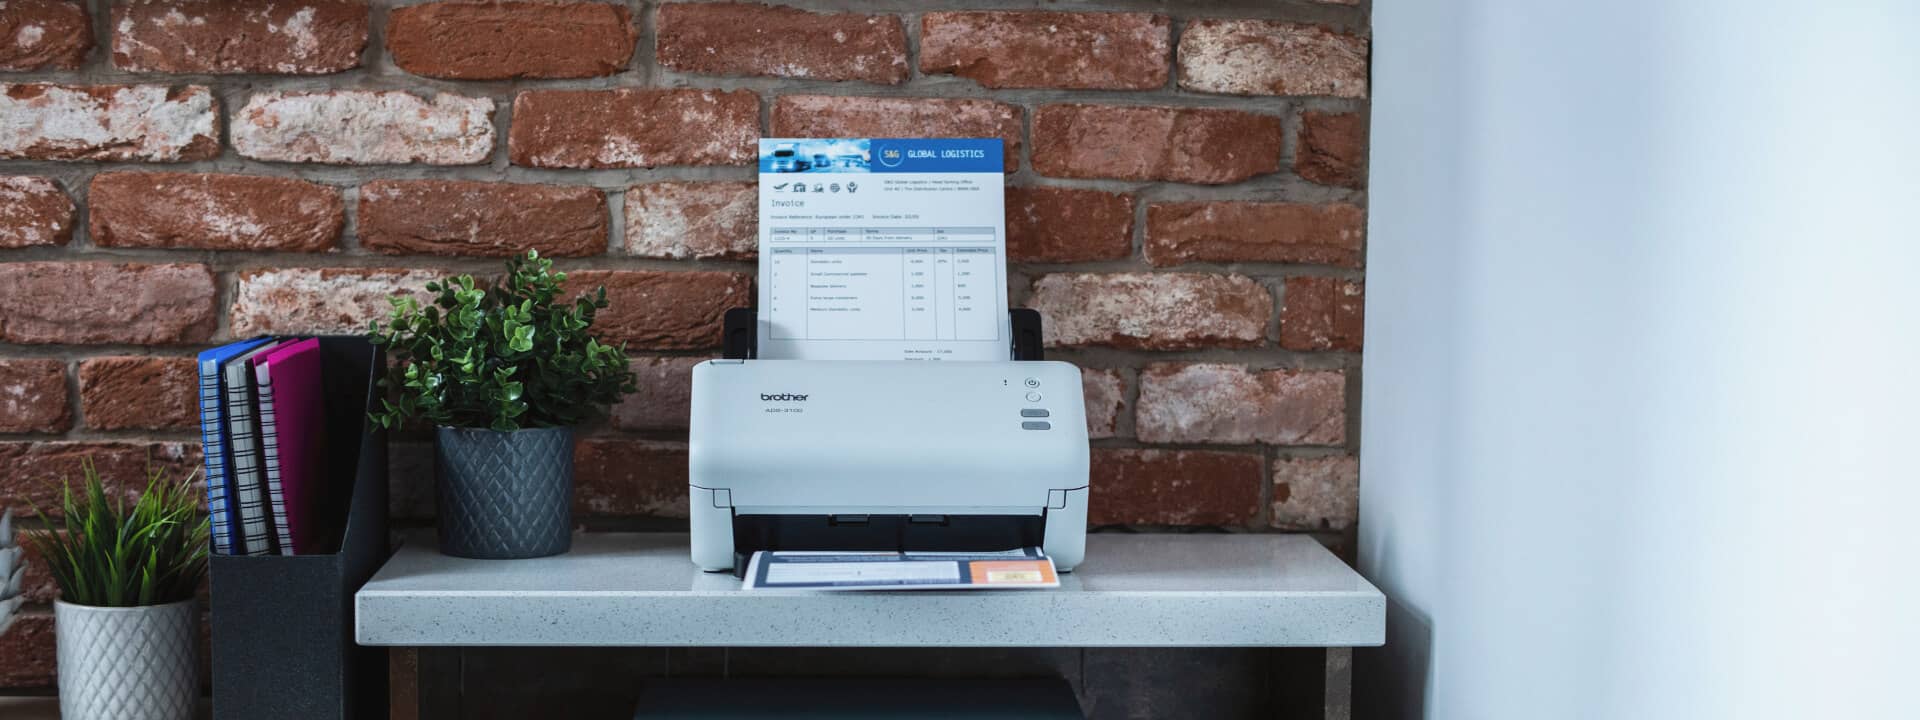 A Brother document scanner ADS-3100 in a home office setting scanning a document